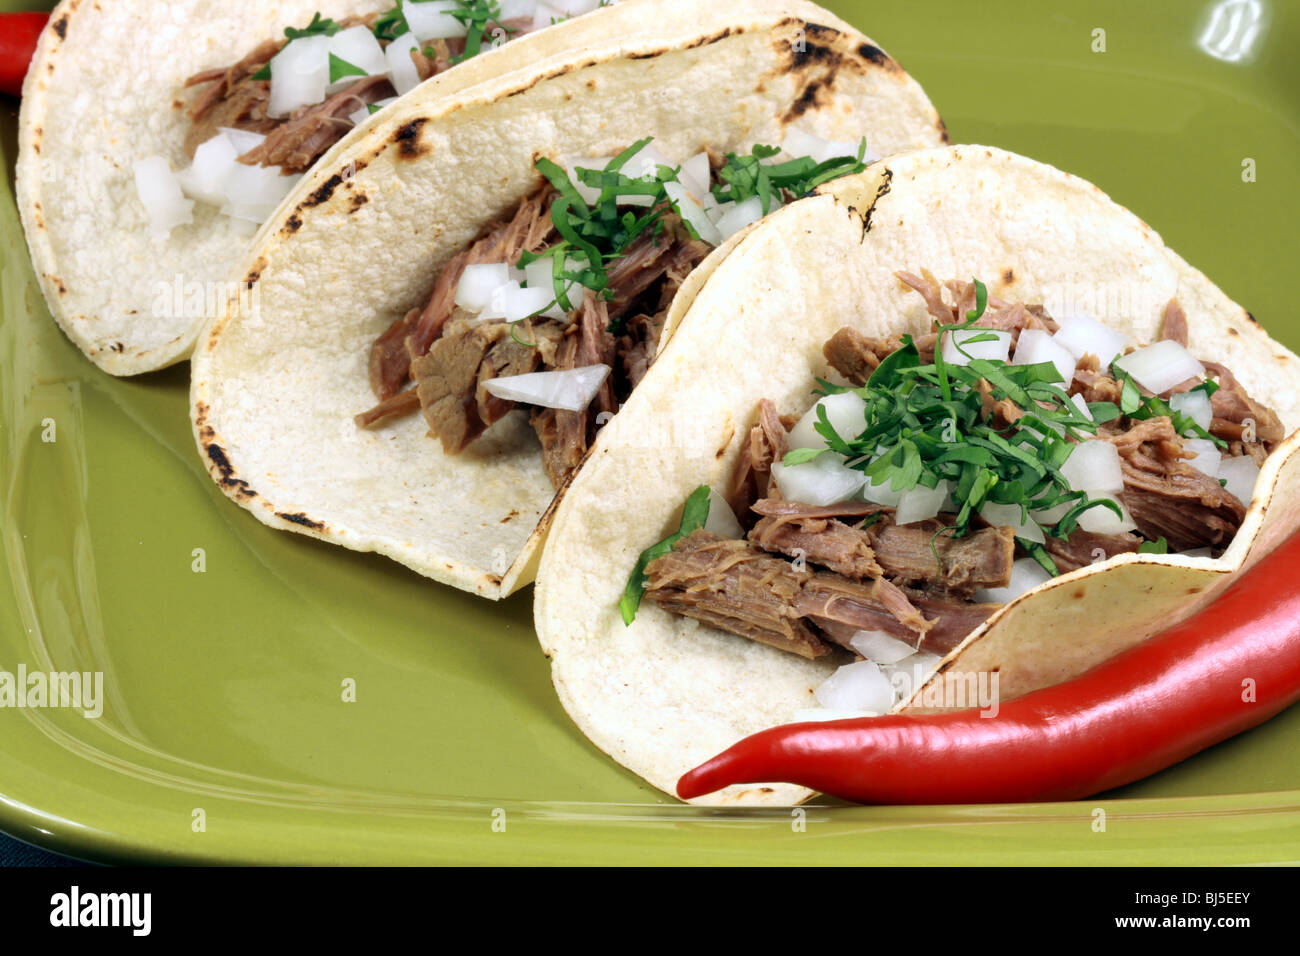 mexican tacos meal or delicious snack, made with beef, corn tortilla, cilantro and onions on a fancy green mexican style plate Stock Photo